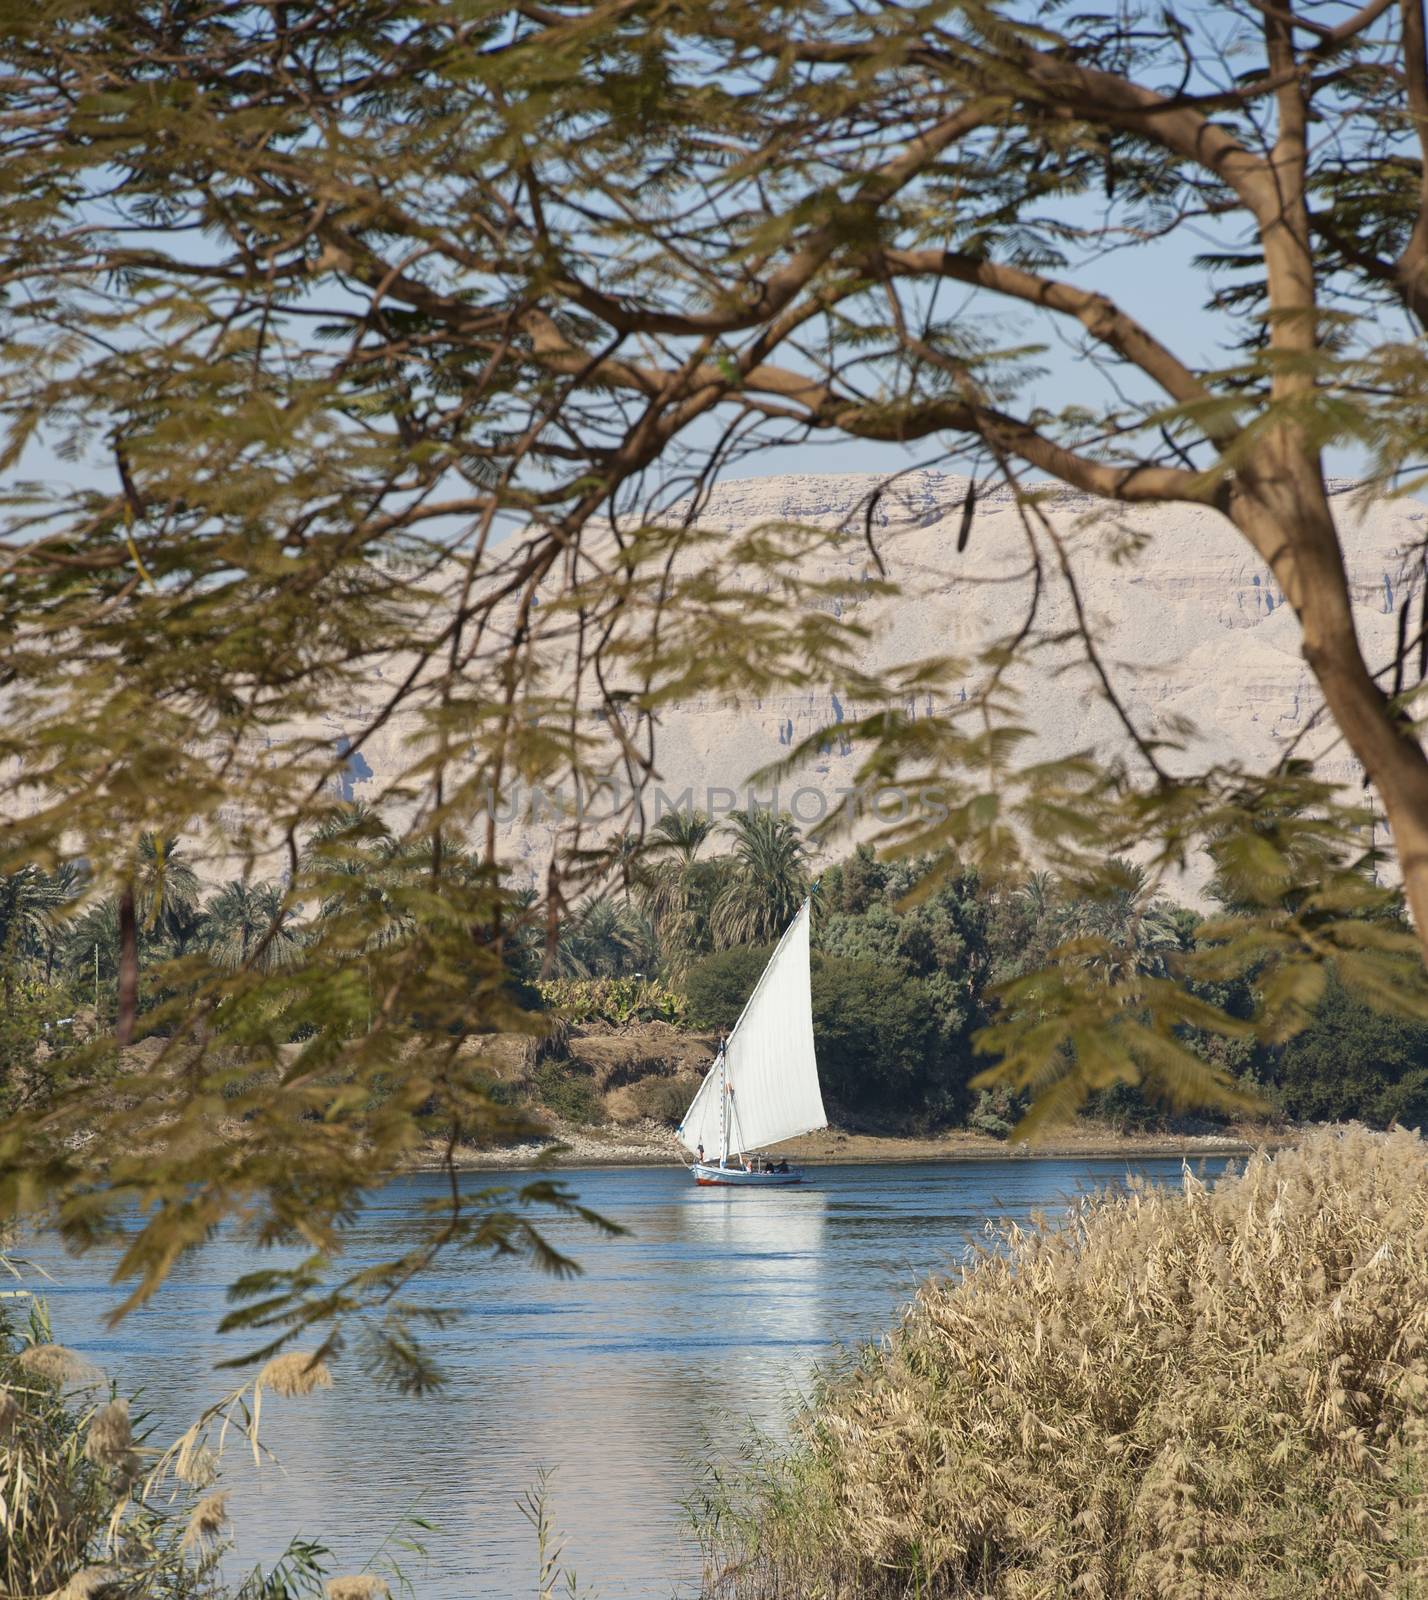 Traditional sailing felluca on the Nile by paulvinten